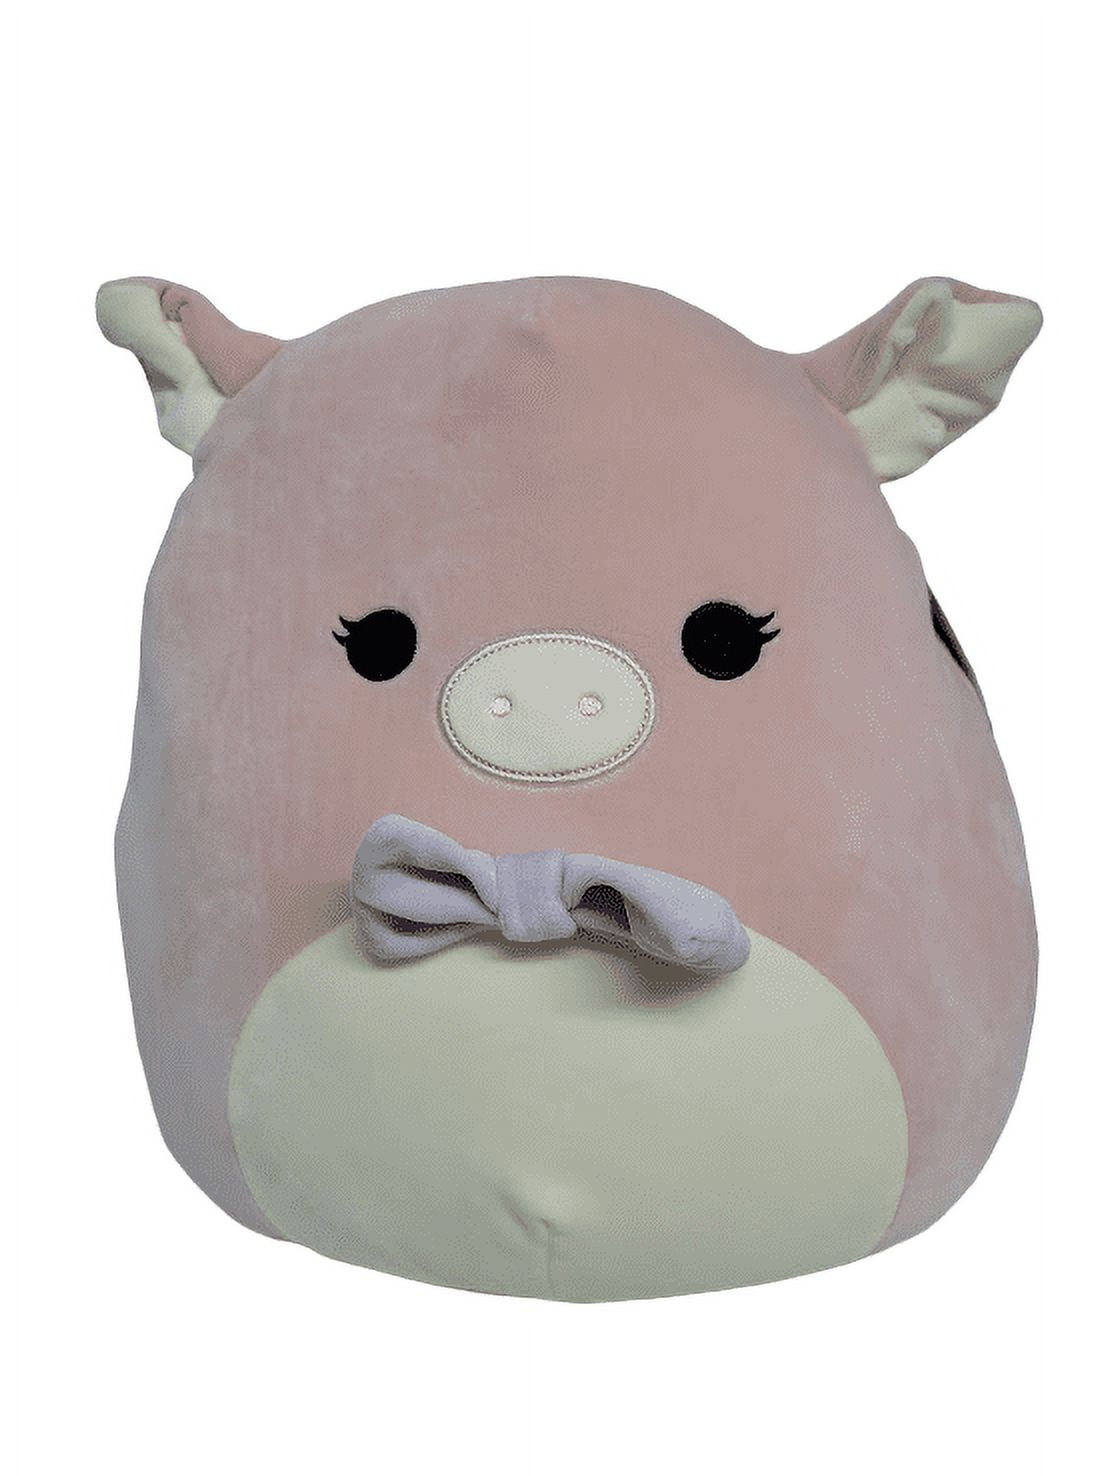 Squishmallows Official Kellytoys Plush 14 Inch Hettie the Pink Pig with  Bowtie Ultimate Soft Plush Stuffed Toy